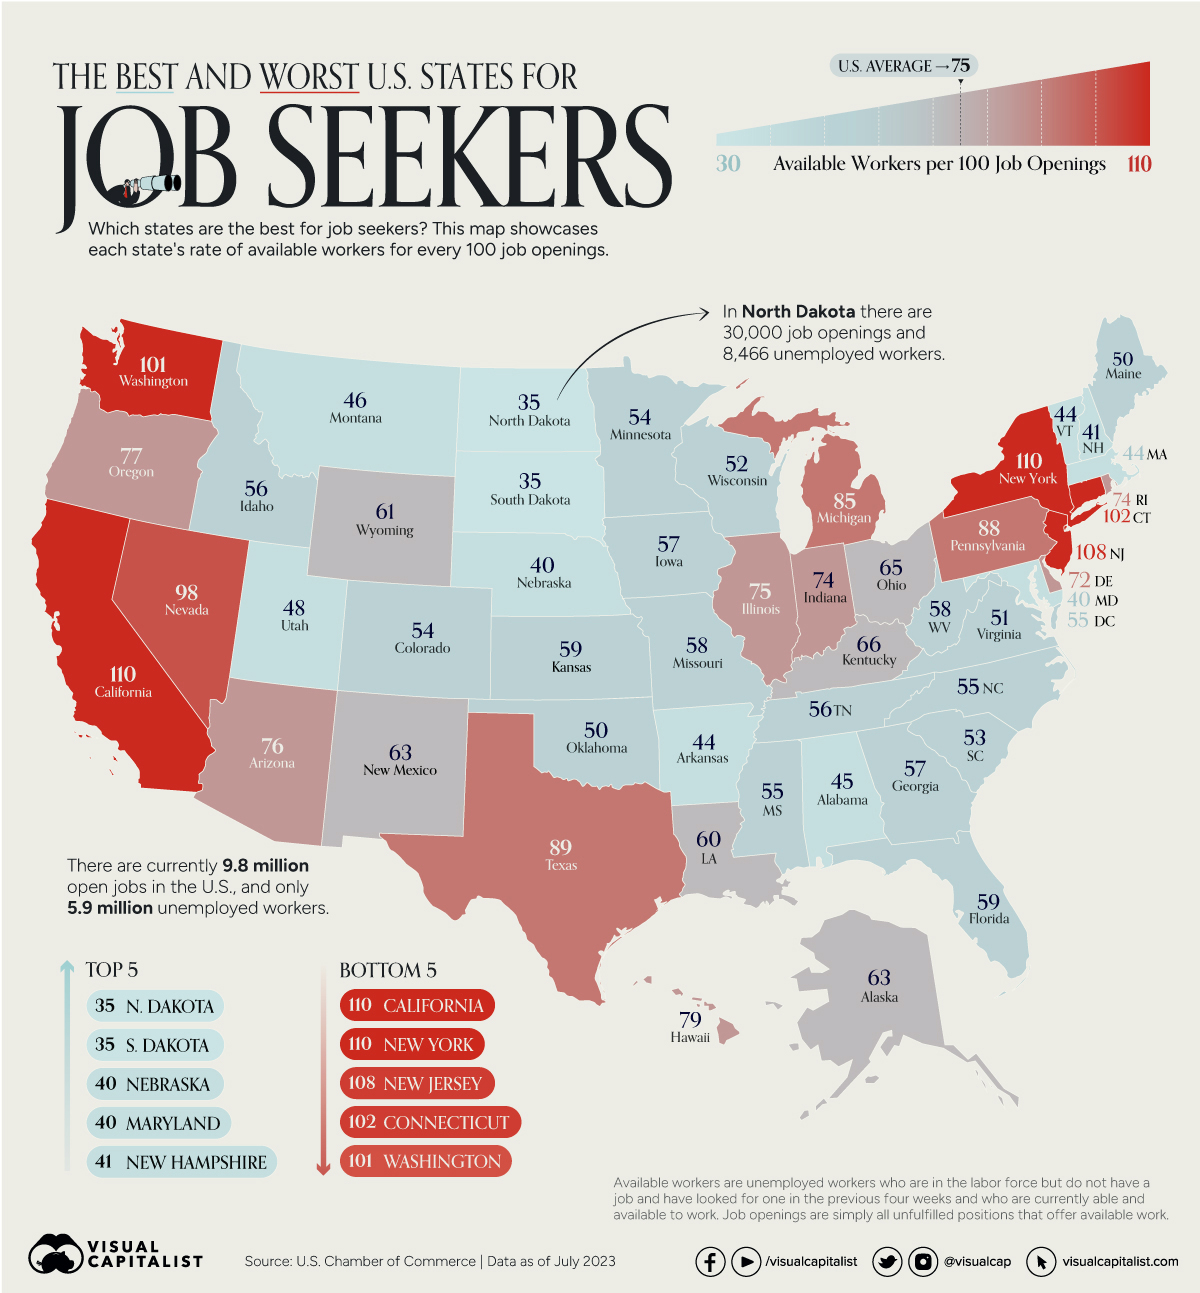 Mapped: Unemployed Workers vs. Job Openings, by U.S. State